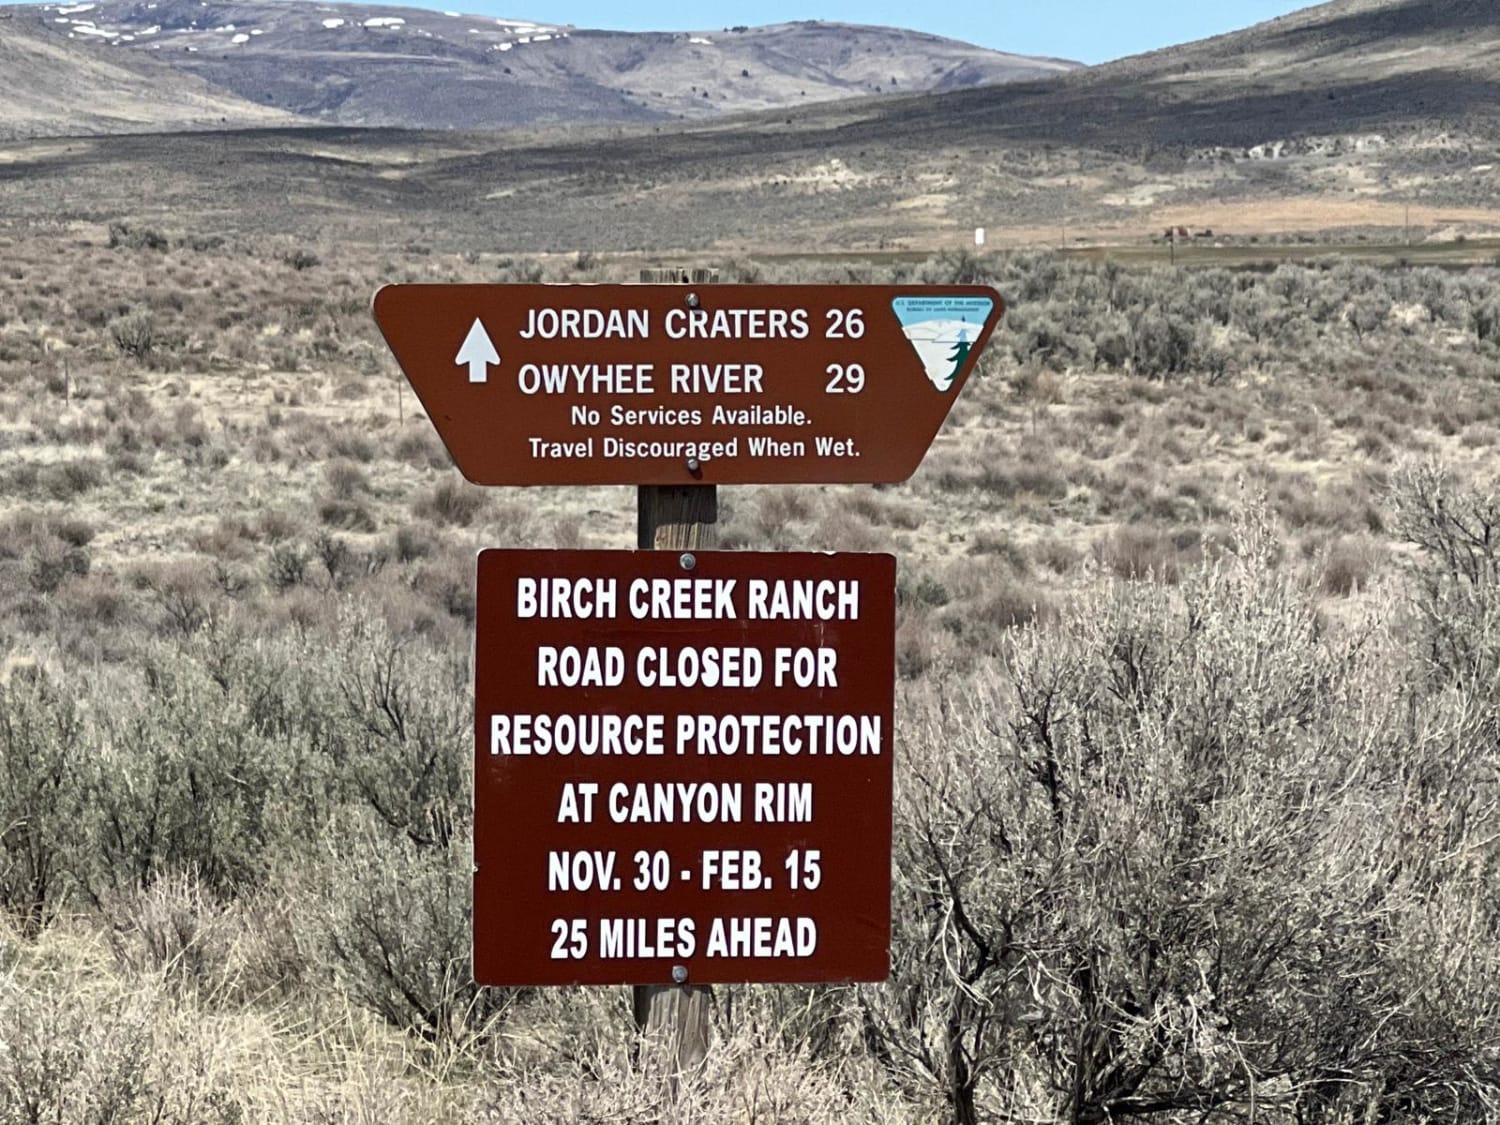 Jordan Craters and Owyhee River Trail